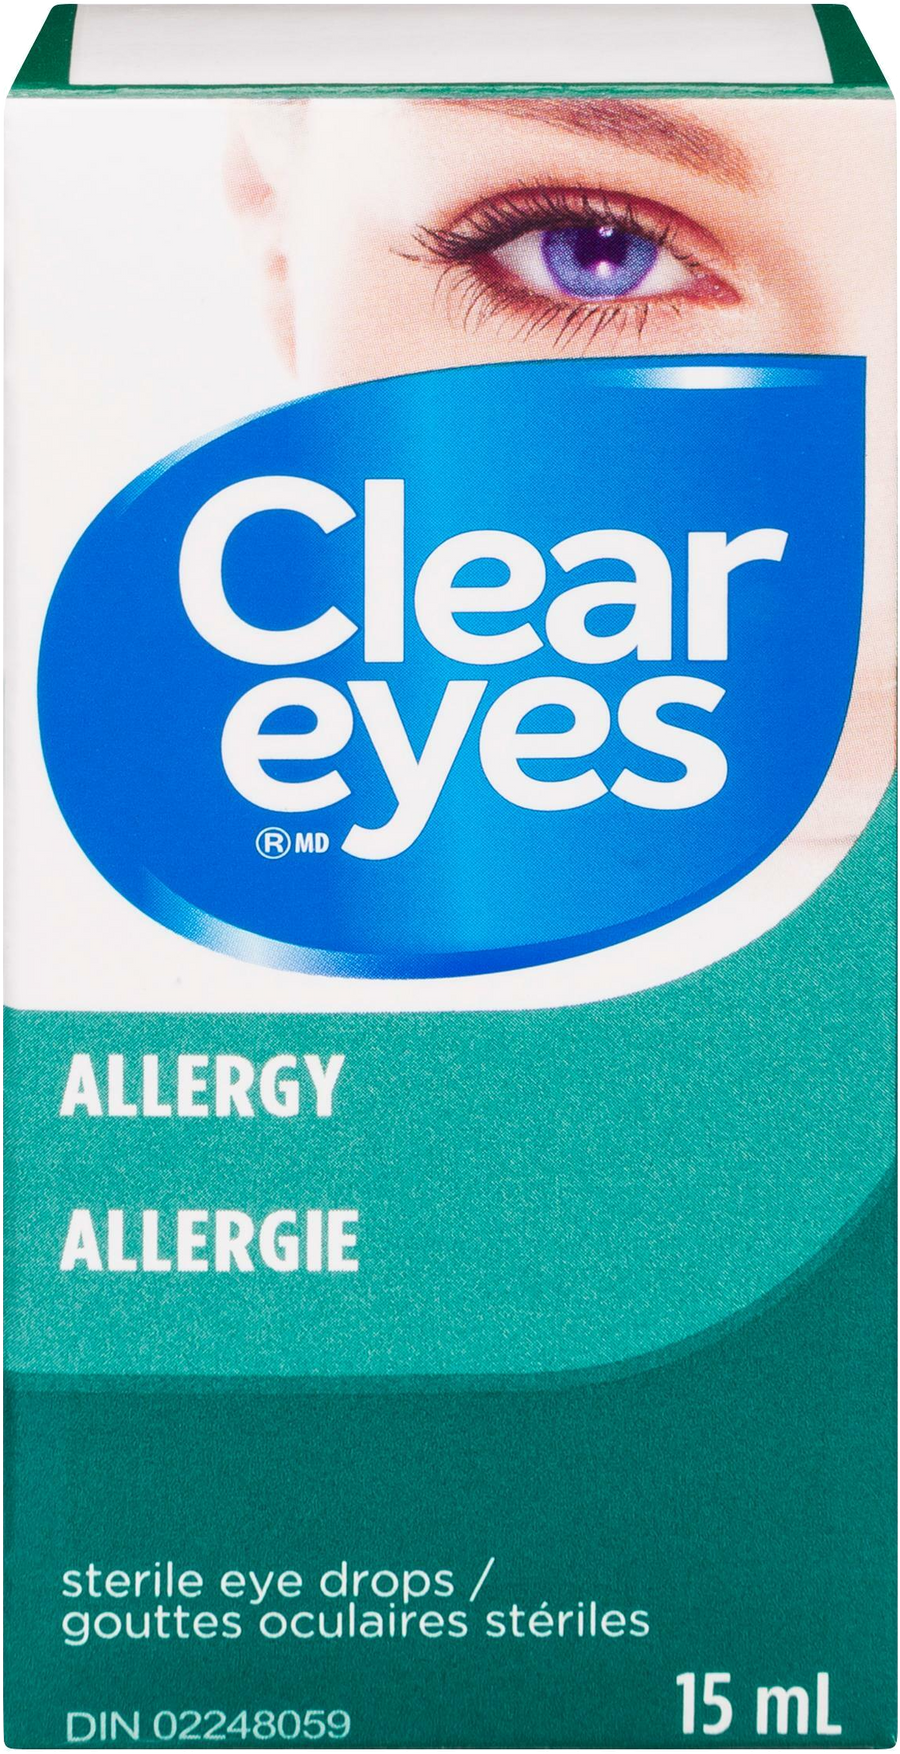 Clear Eyes Allergy Sterile Eye Drops 15mL ( 6 Pack ) - Quecan